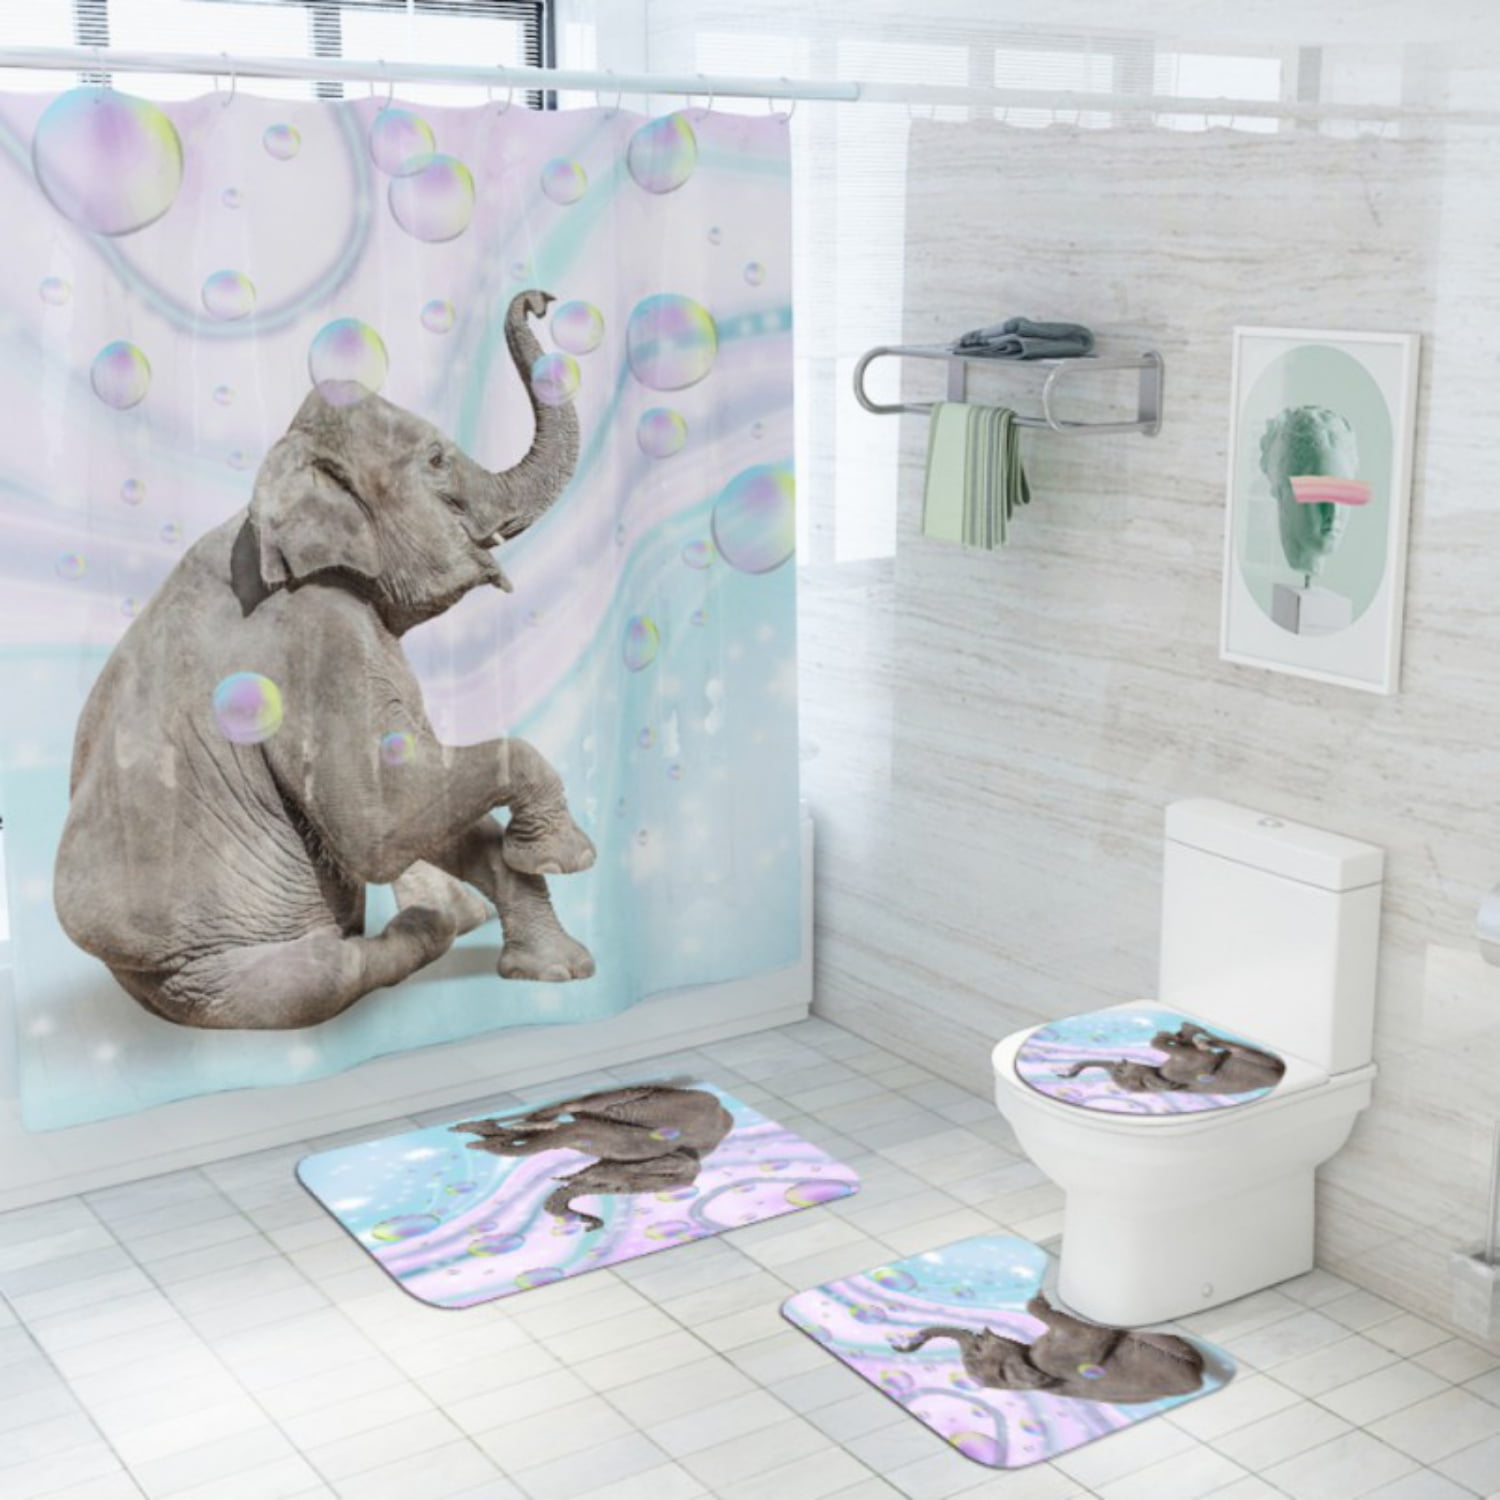 Details about   Elephant Riding A Scooter Shower Curtain Toilet Cover Rug Mat Contour Rug Set 